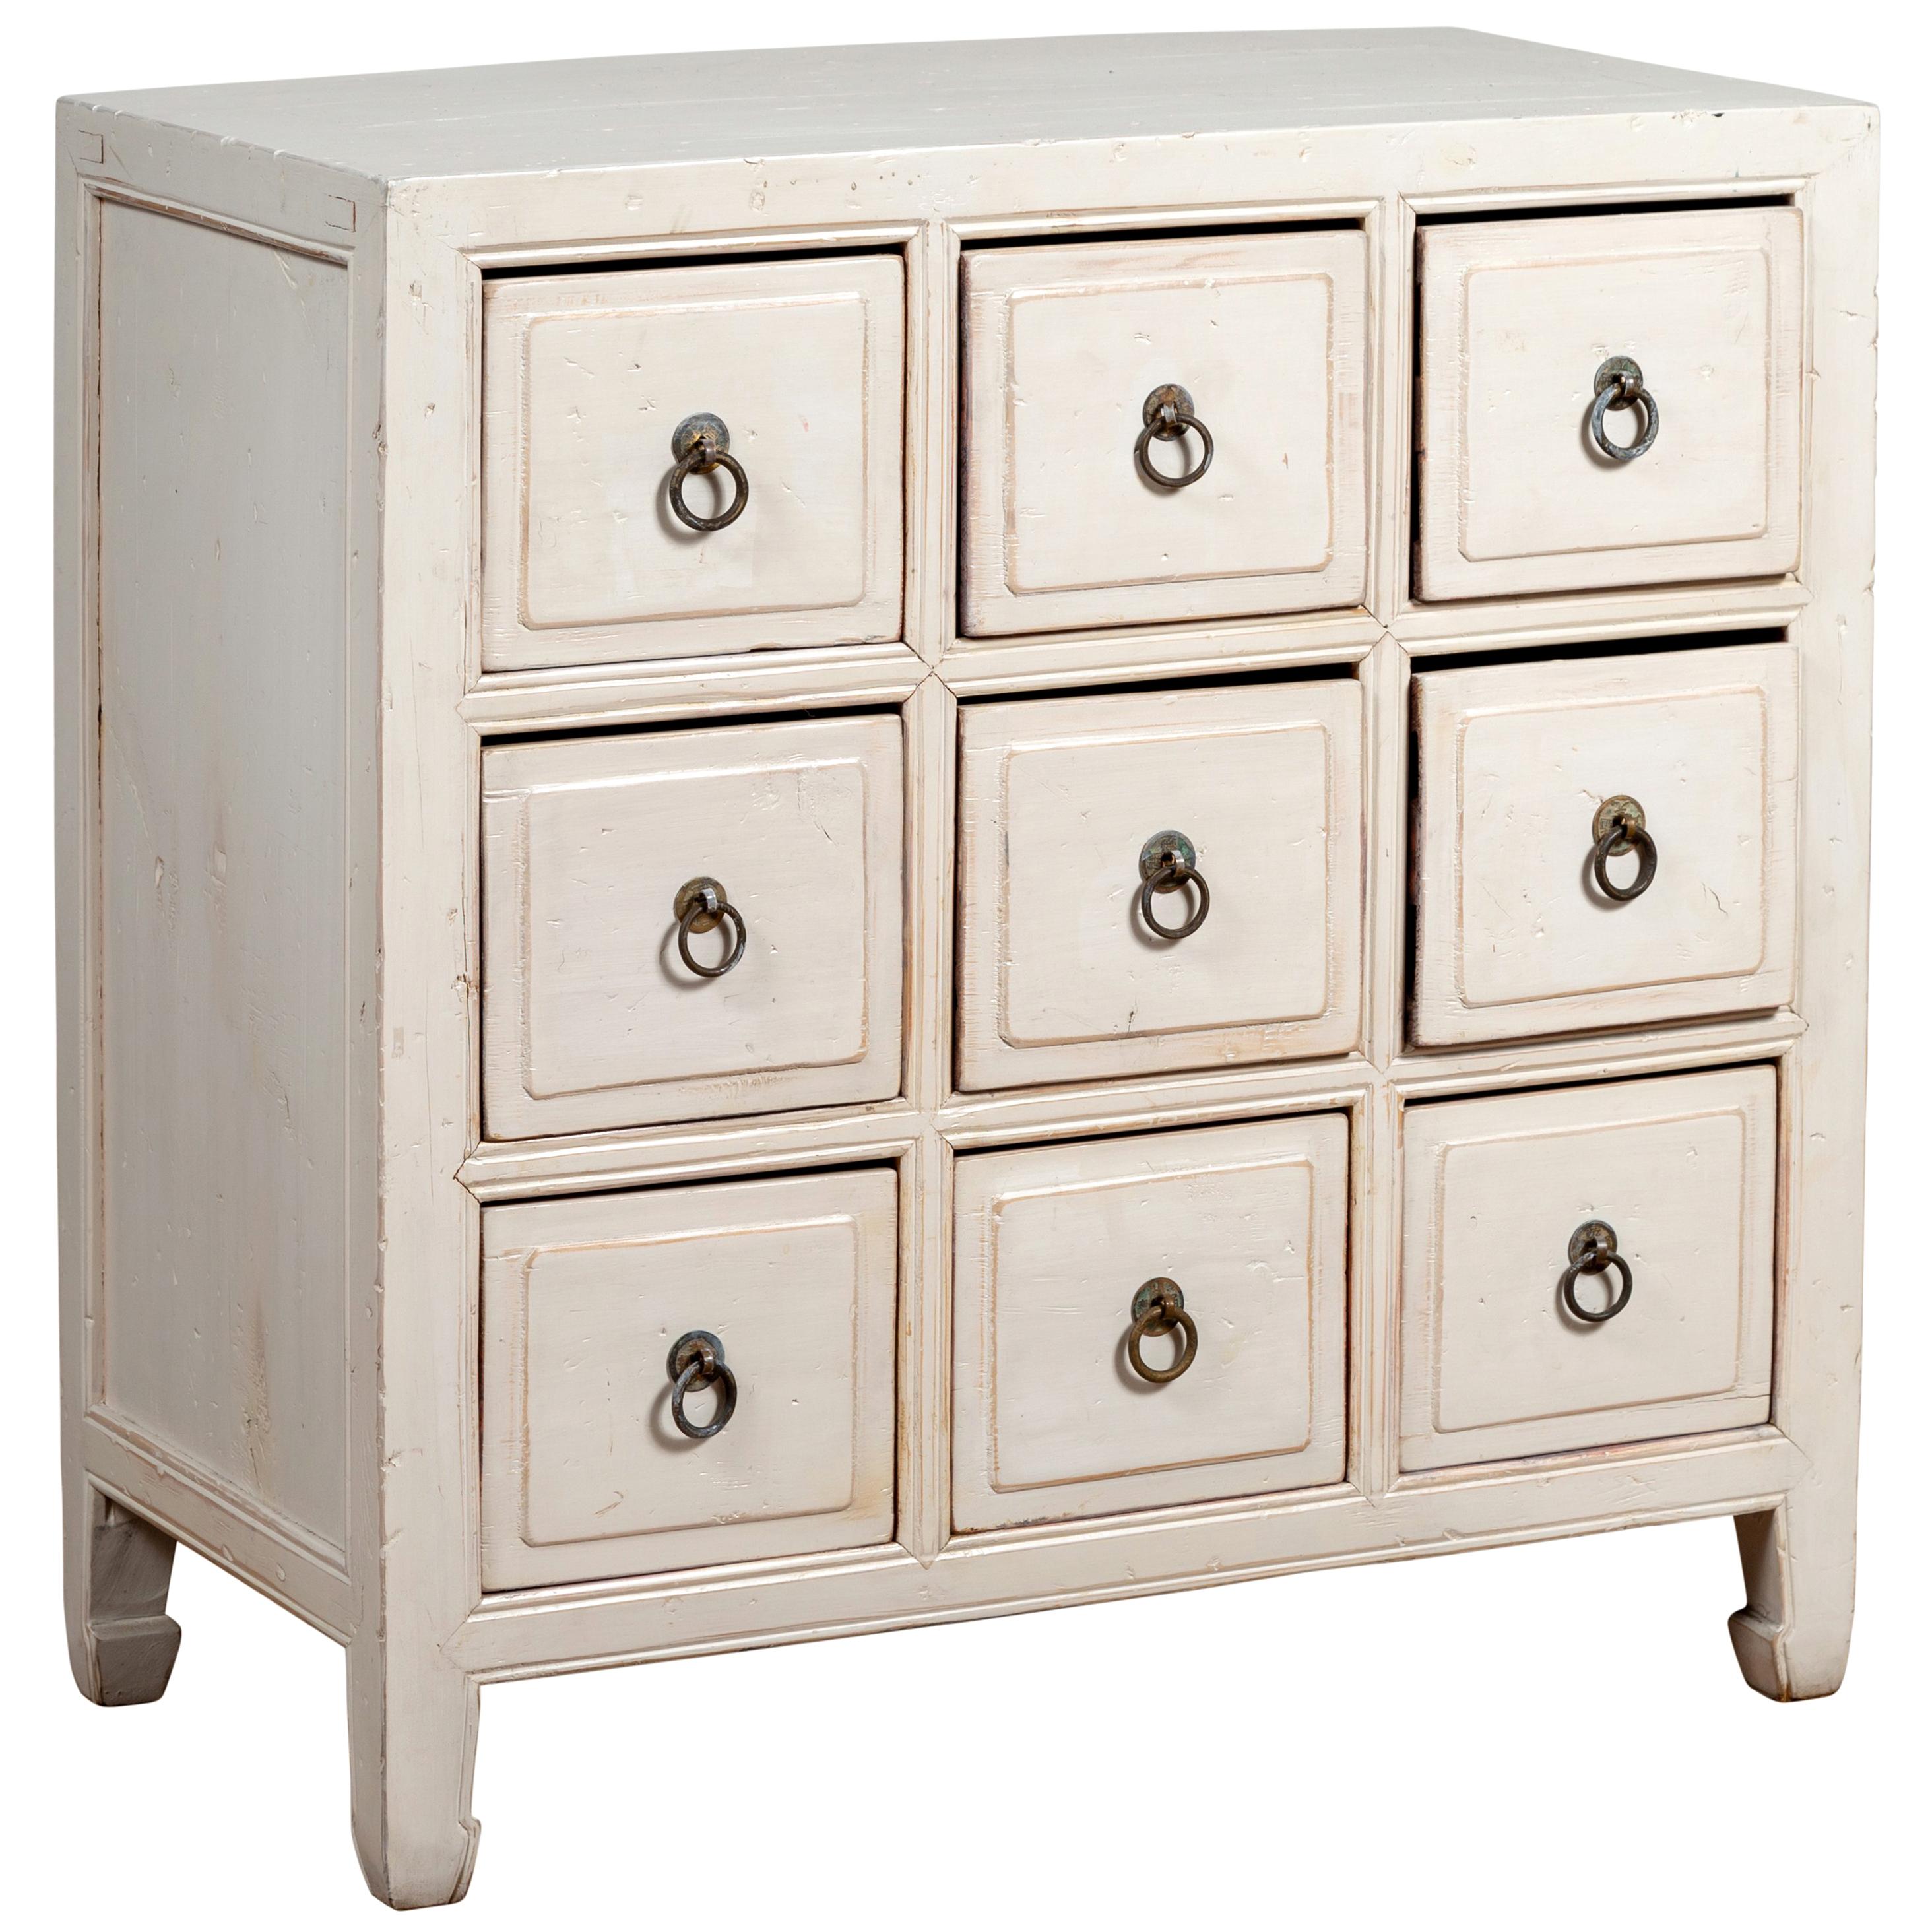 Chinese Vintage White Painted Wood Nine-Drawer Apothecary Chest, circa 1950